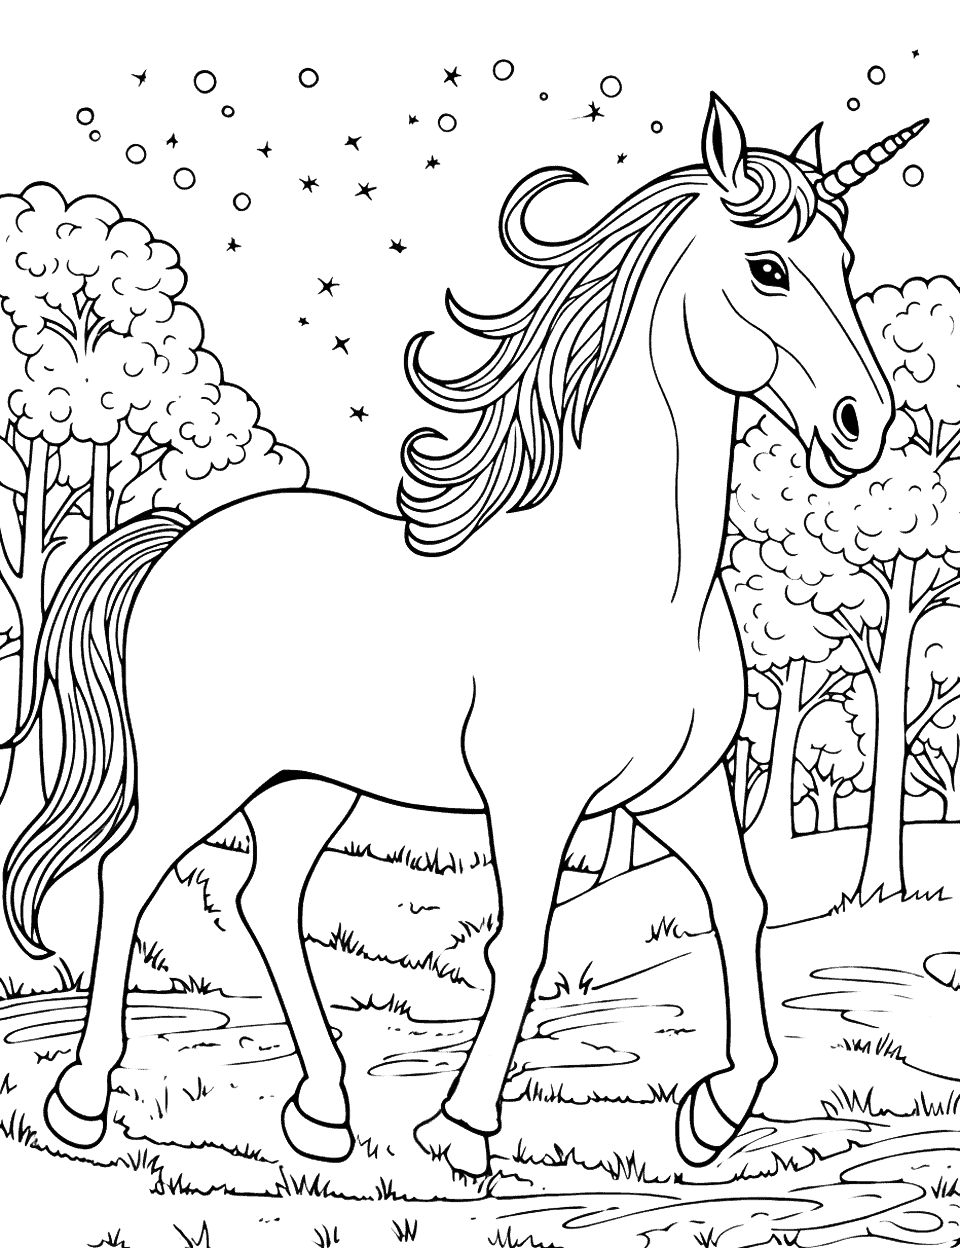 Unicorn in a Magical Forest Coloring Page - A unicorn prancing through a magical forest with twinkling stars above.